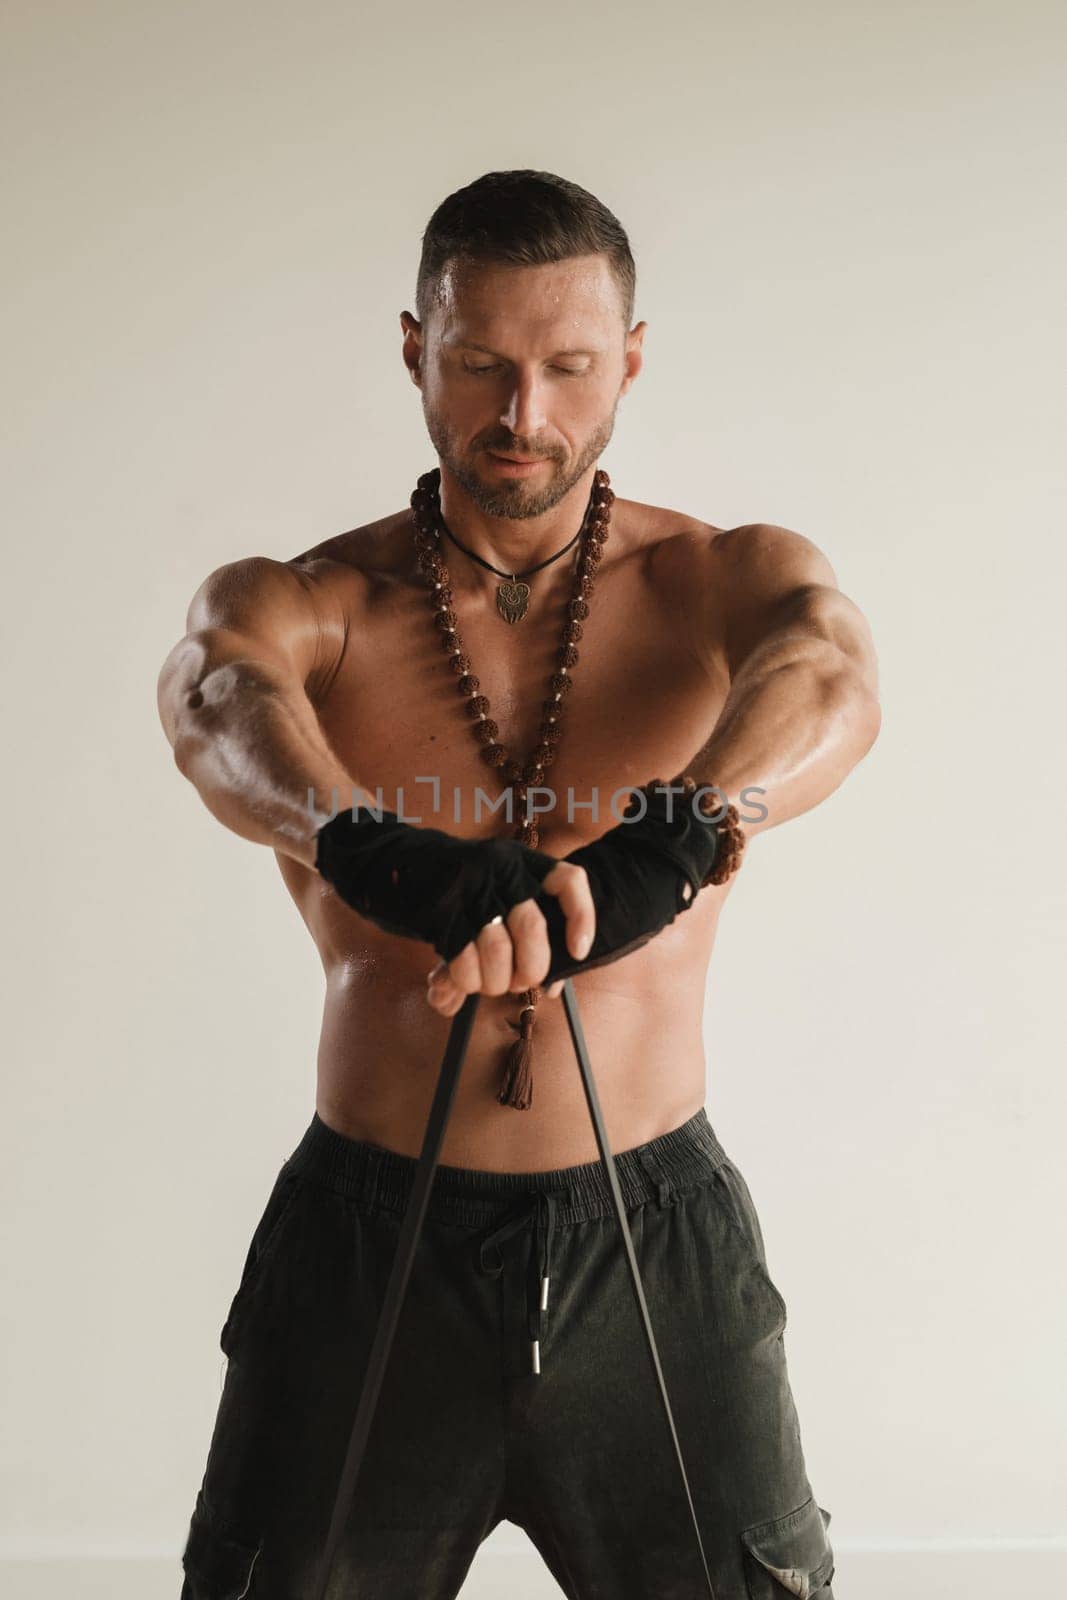 A man with a naked torso is engaged in strength fitness using a rubber loop indoors by Lobachad